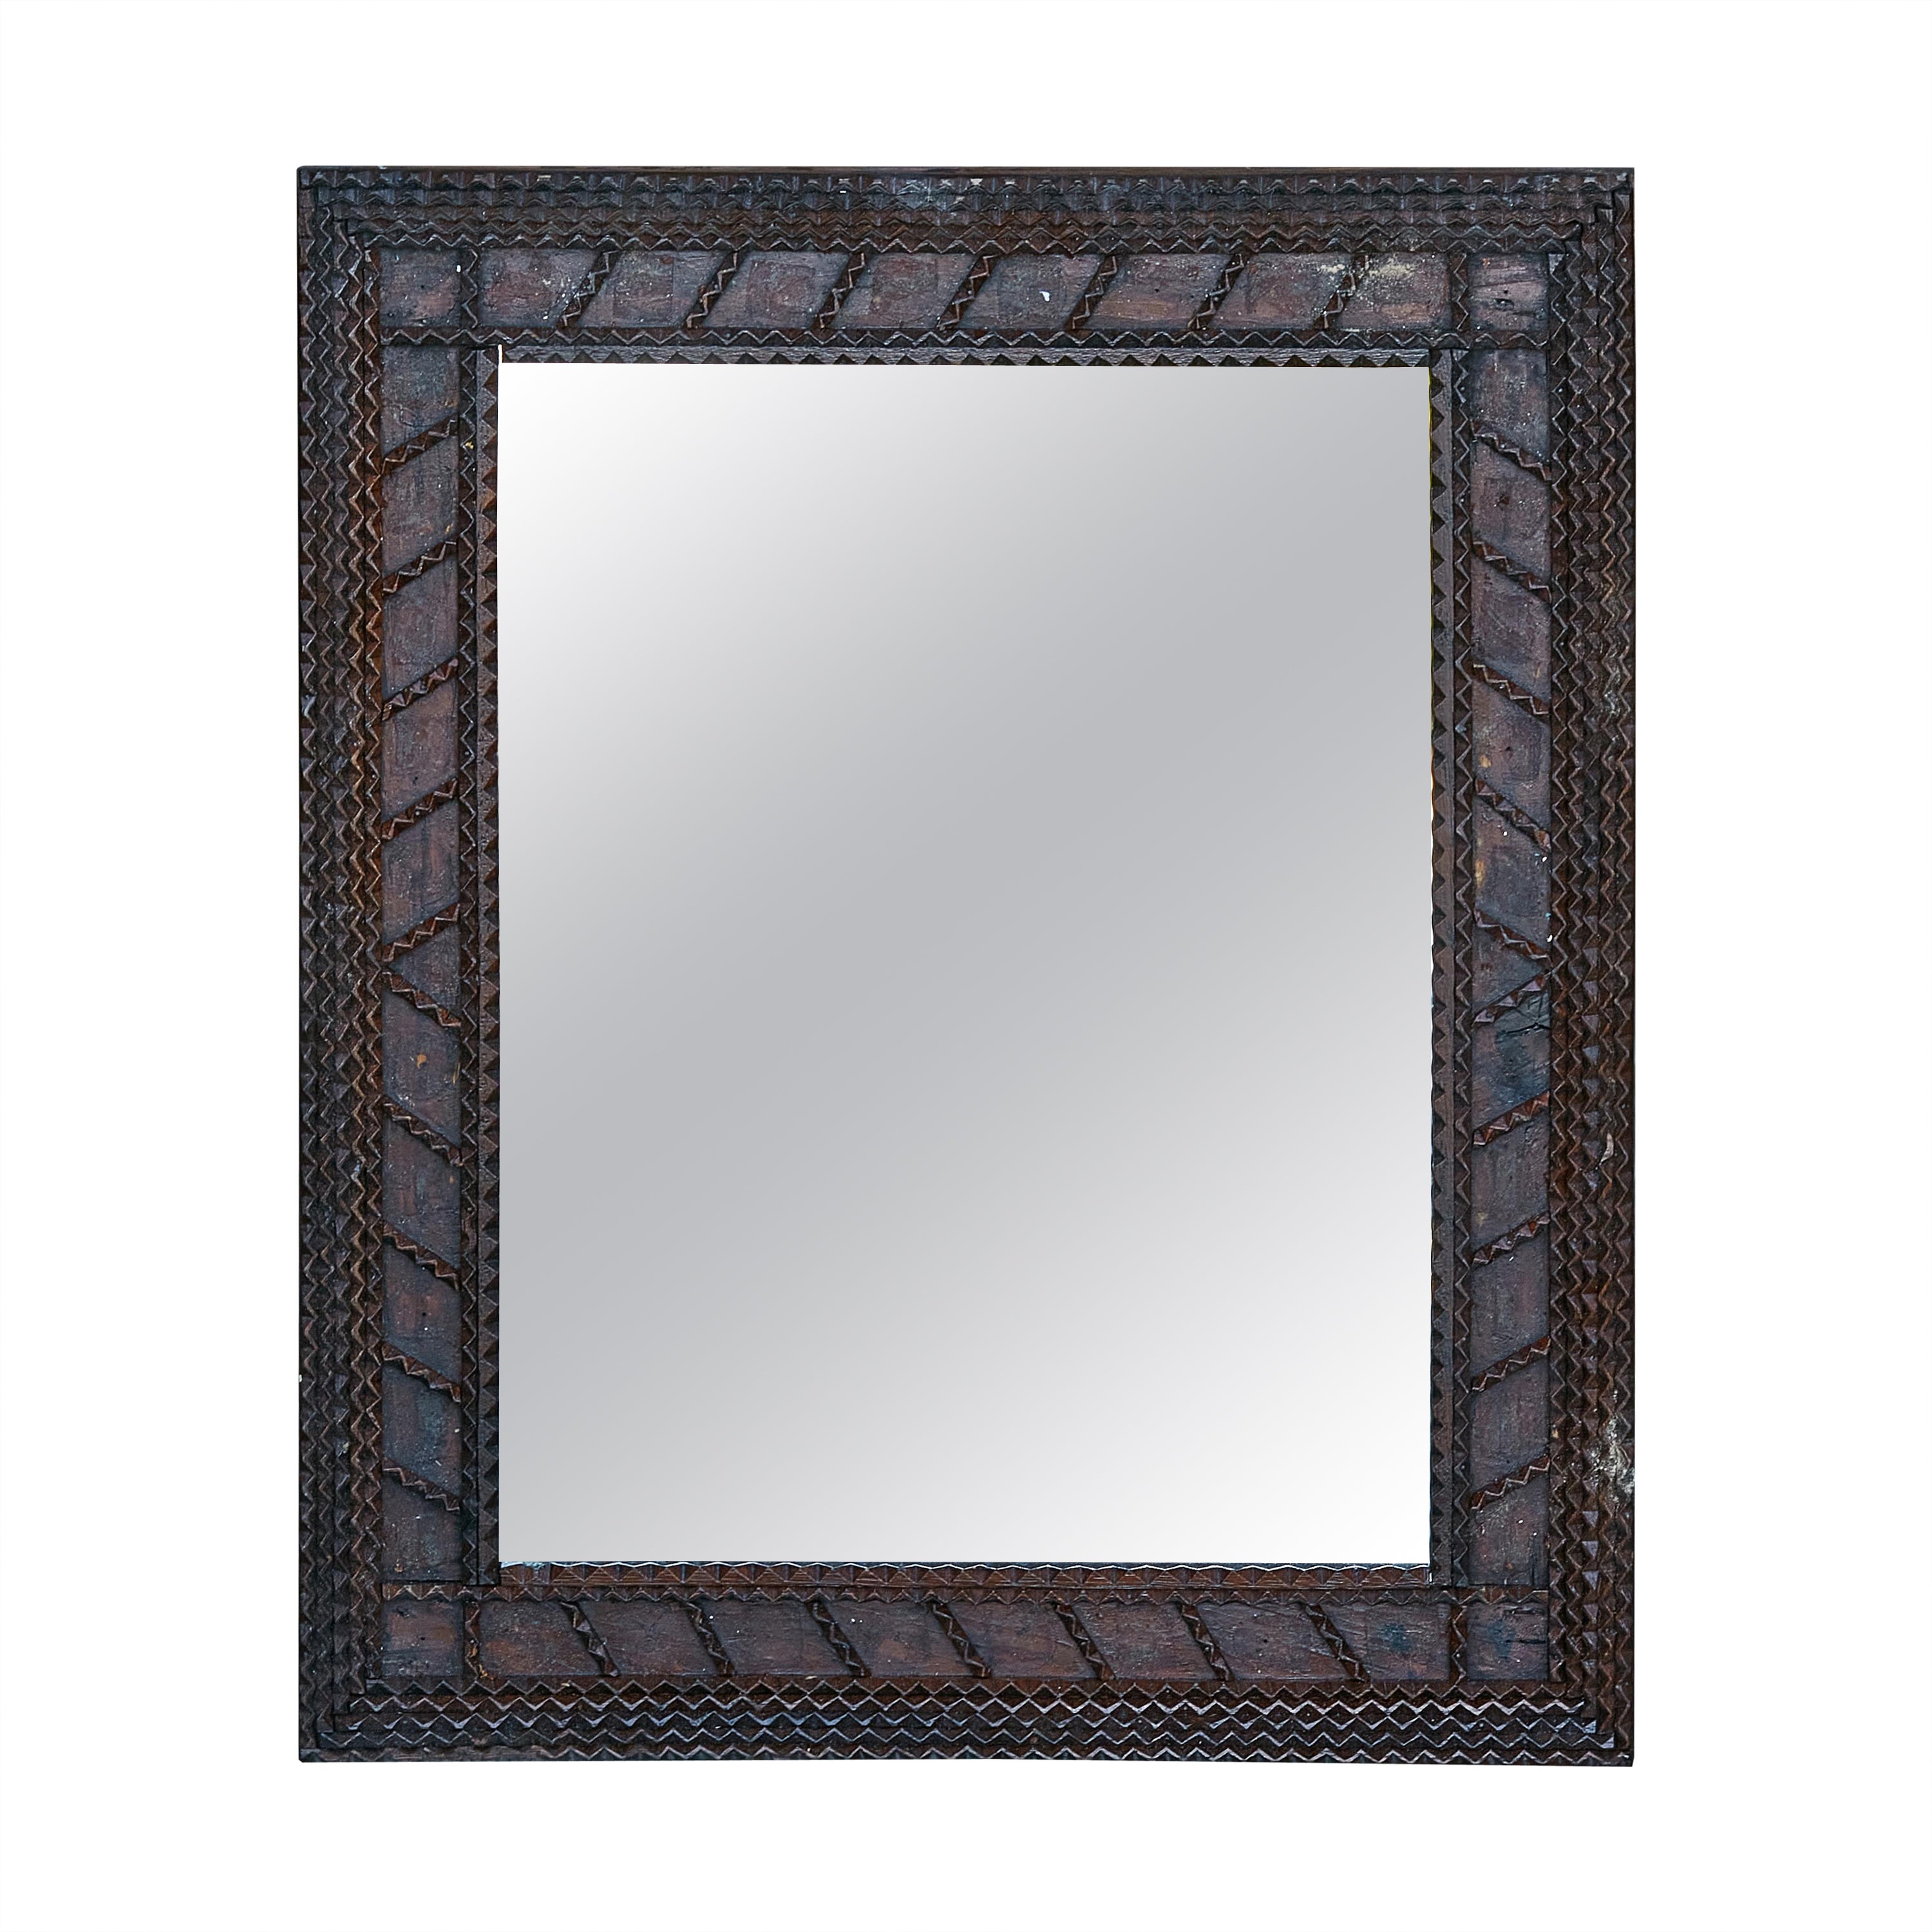 Small French Tramp Art Turn of the Century Mirror with Wavy Patterns, circa 1900